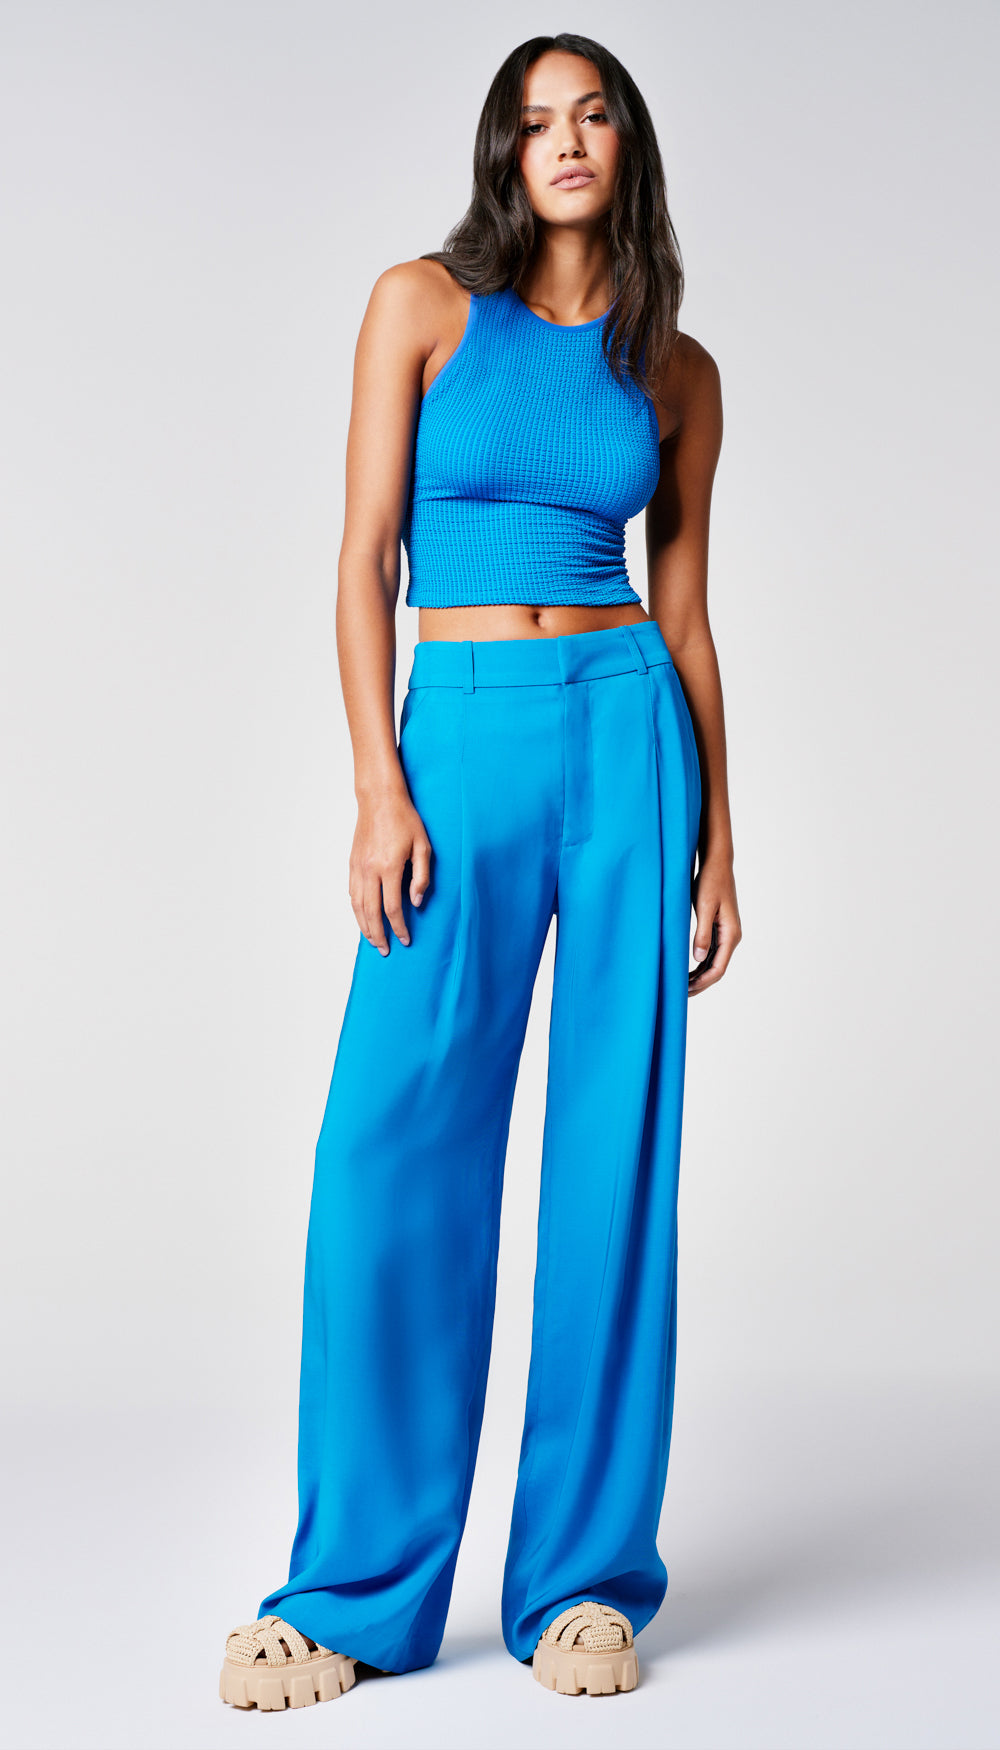 A woman in a solid blue tank and wide leg trousers.